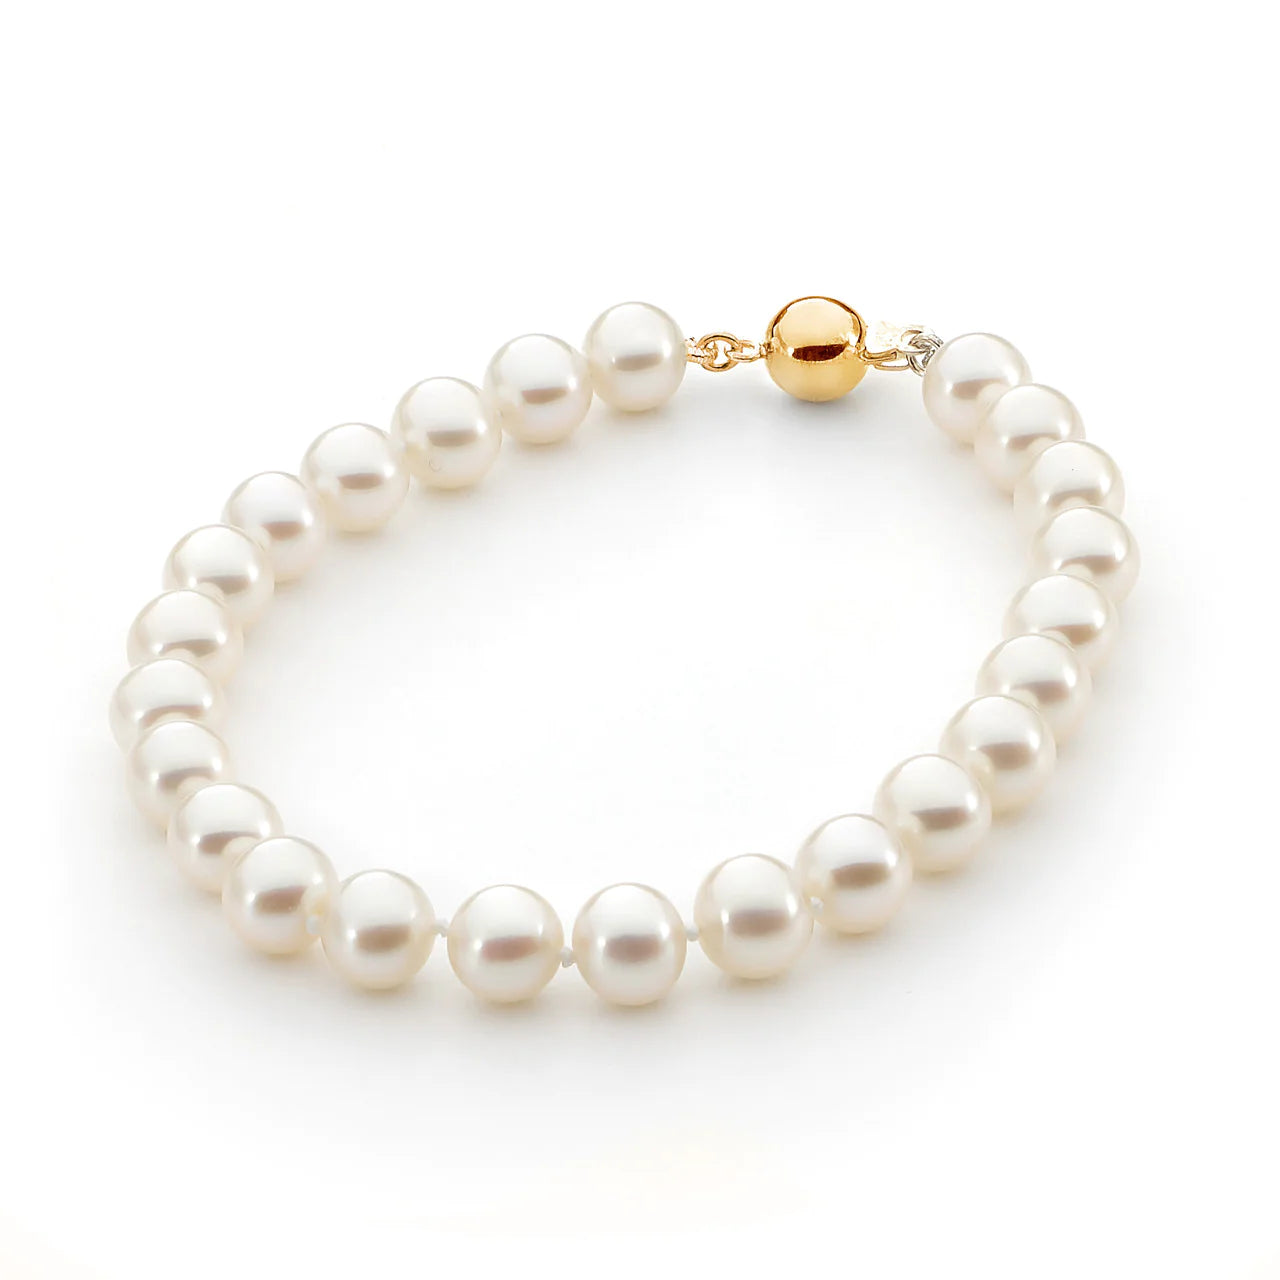 FWP white with gold clasp bracelet